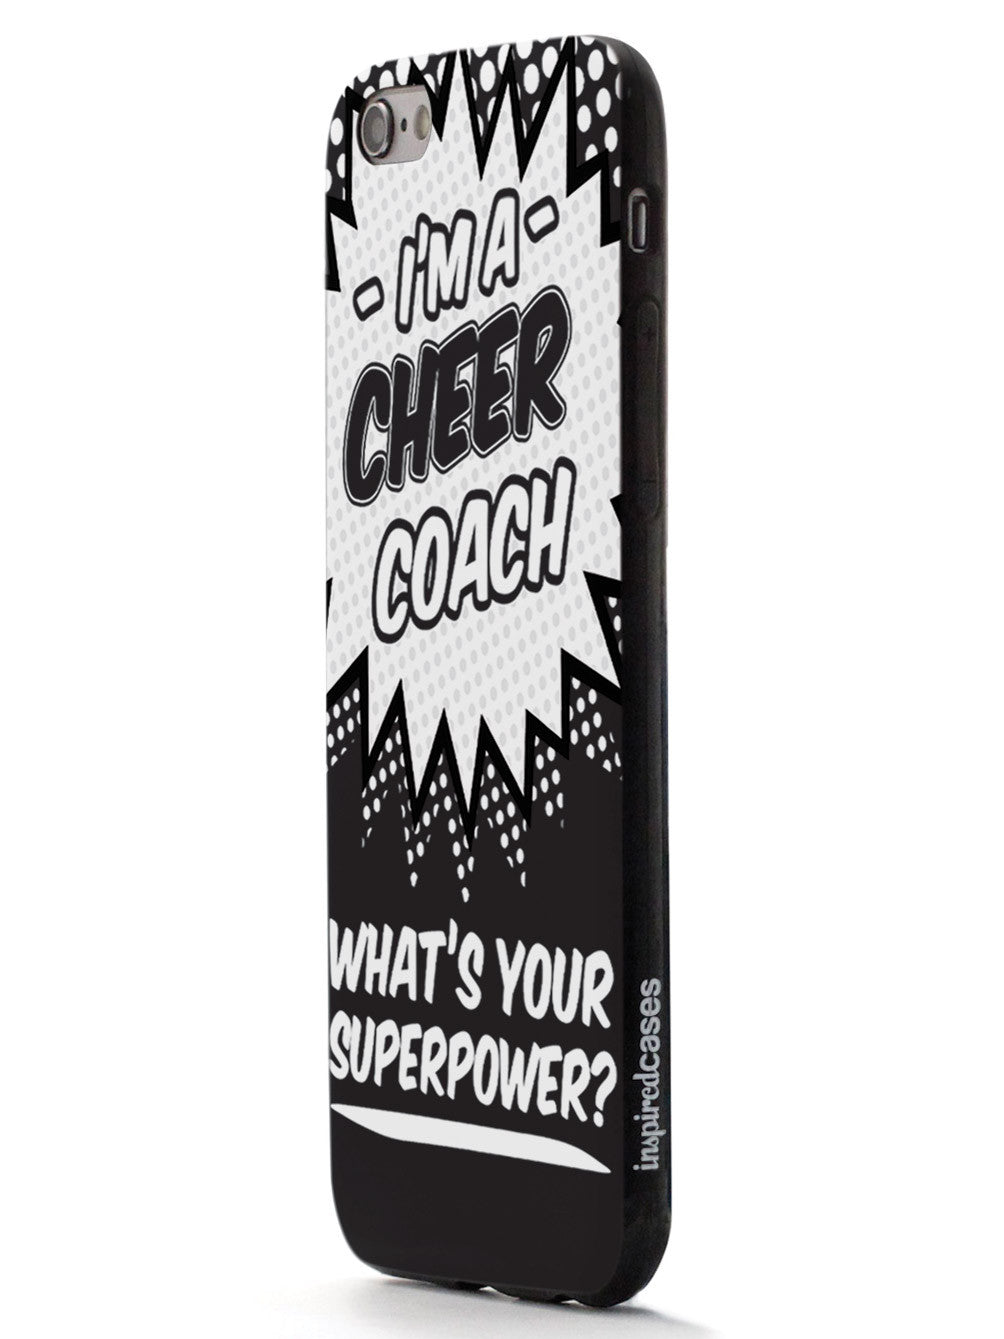 Cheer Coach - What's Your Superpower? Case